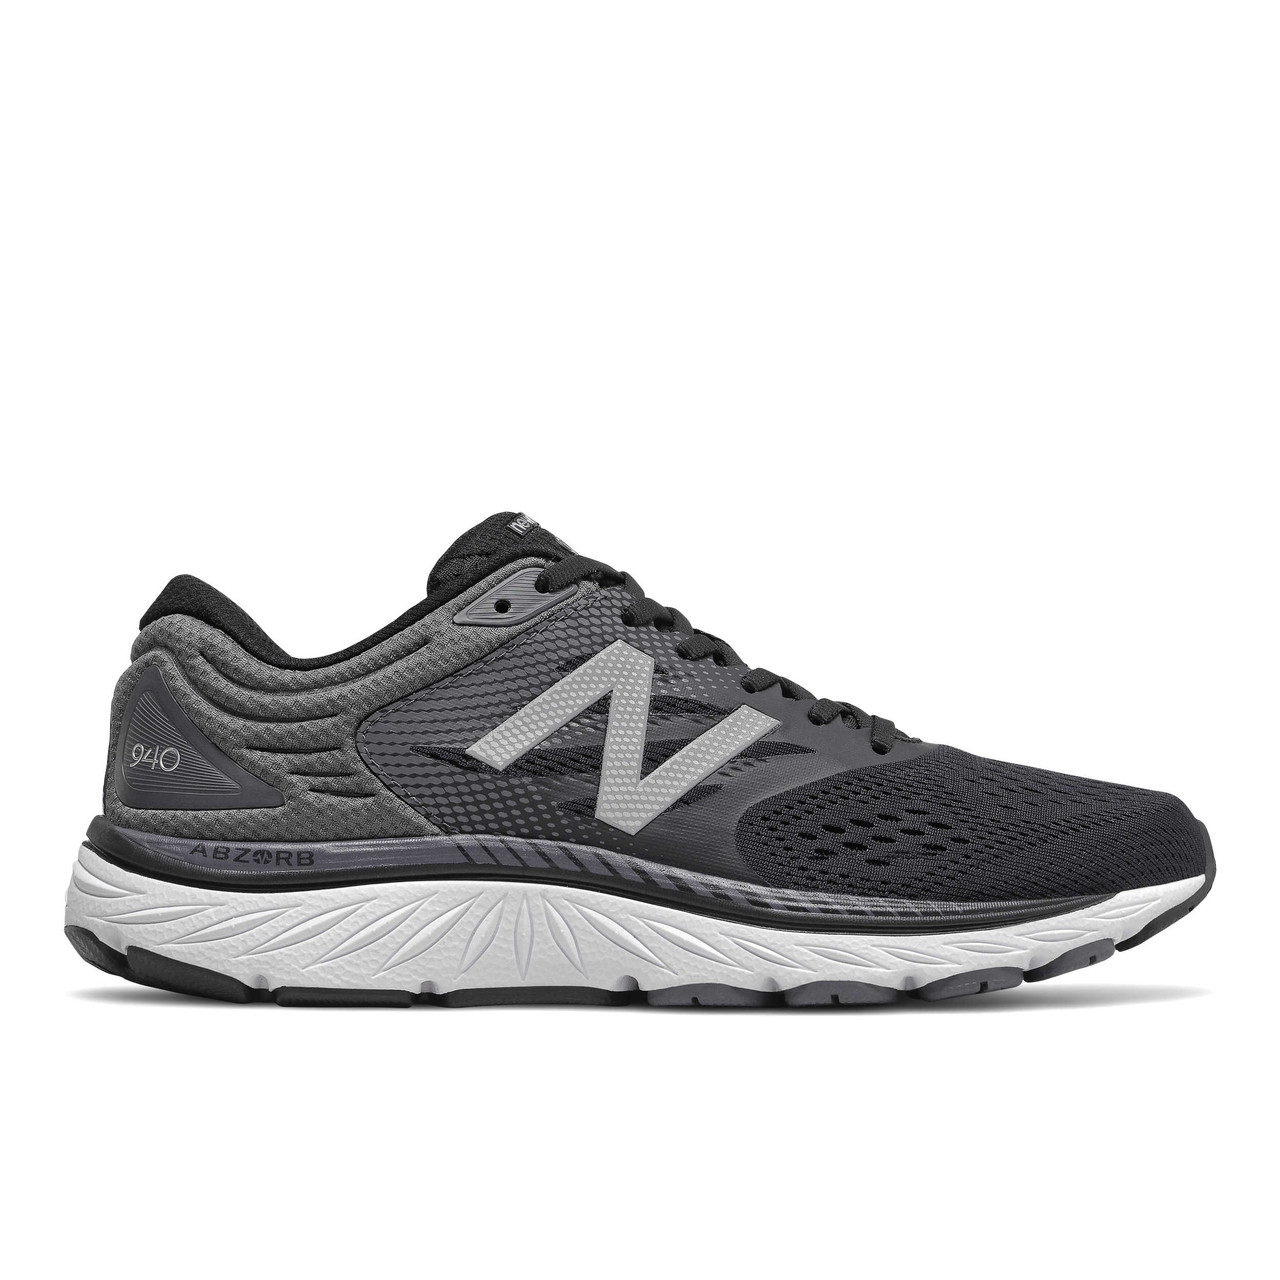 New Balance Mens M940KG4. Stable Running Shoe in Widths B-4E. - Active Soles